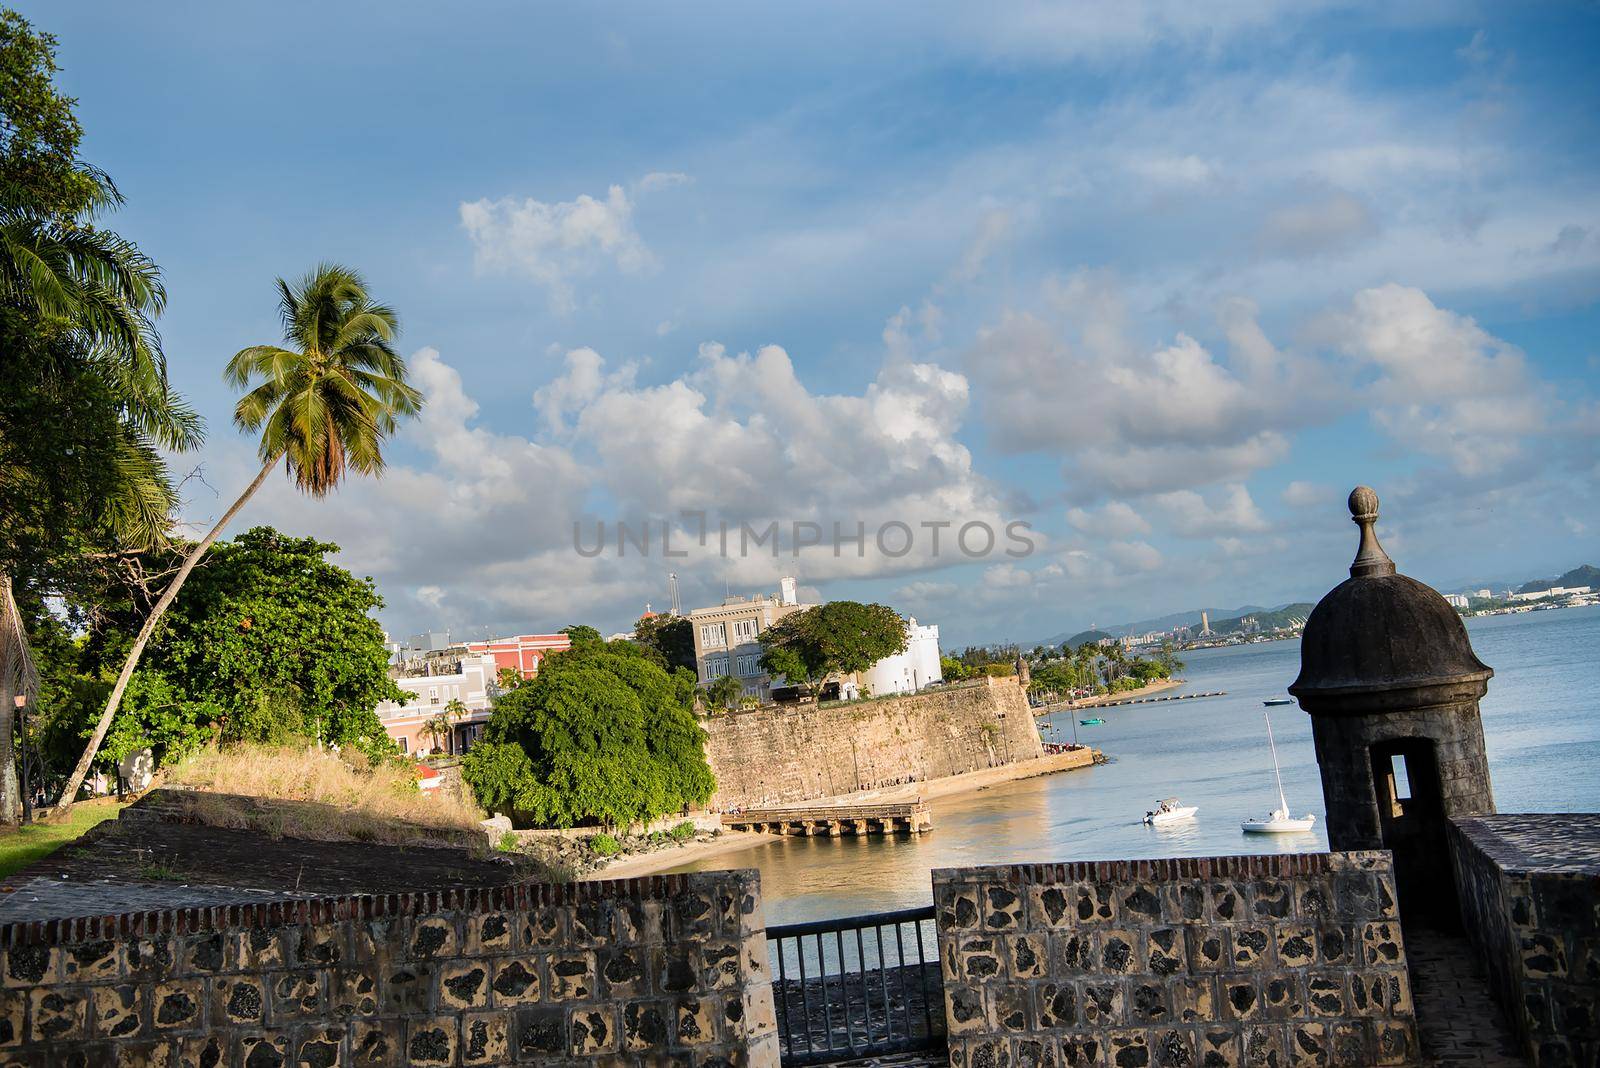 View of San Juan, Puerto Rico city scape with historic brick, palm trees, water, and blue skies. by jyurinko